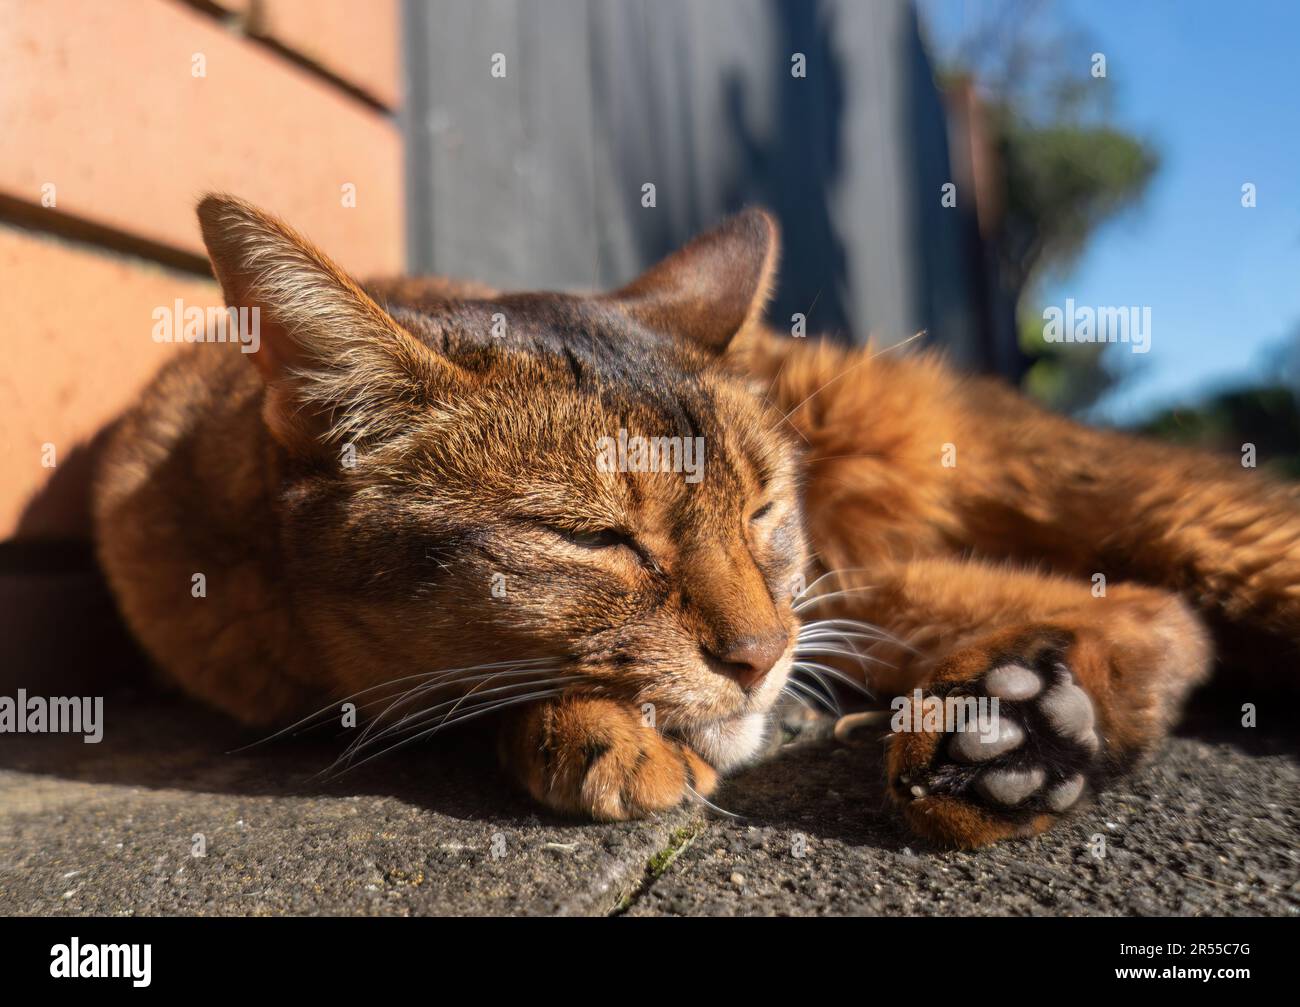 A cat relaxing under the Sun by brick wall at a street corner. Stock Photo